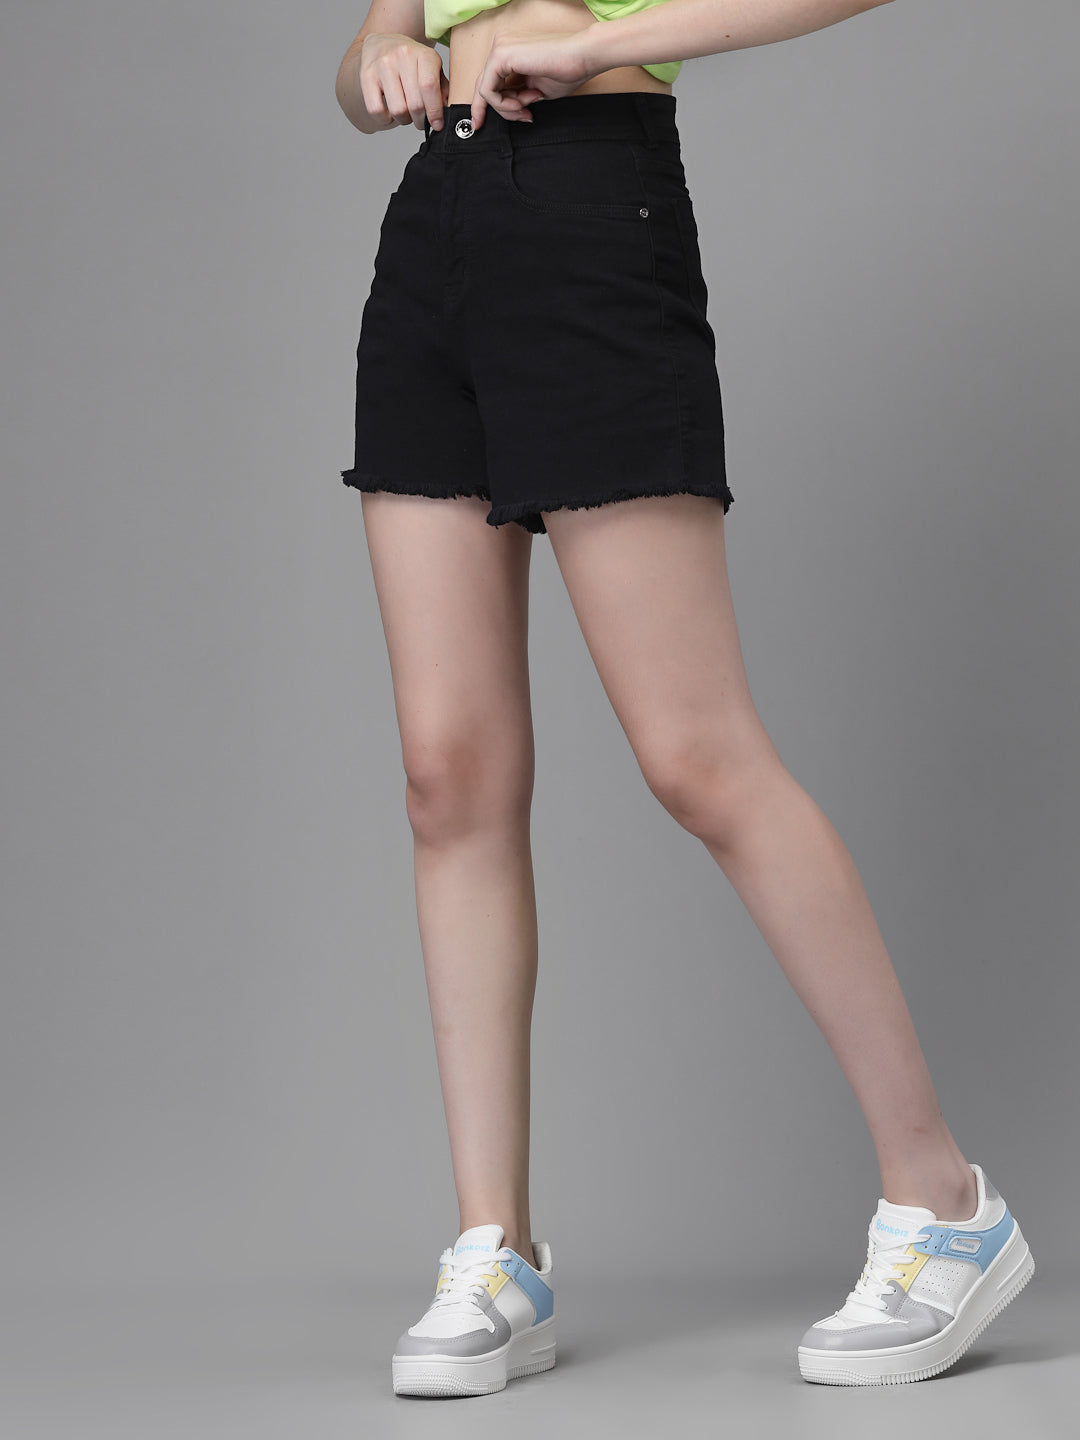 Women Black Cotton Solid Mid Rise Casual Shorts